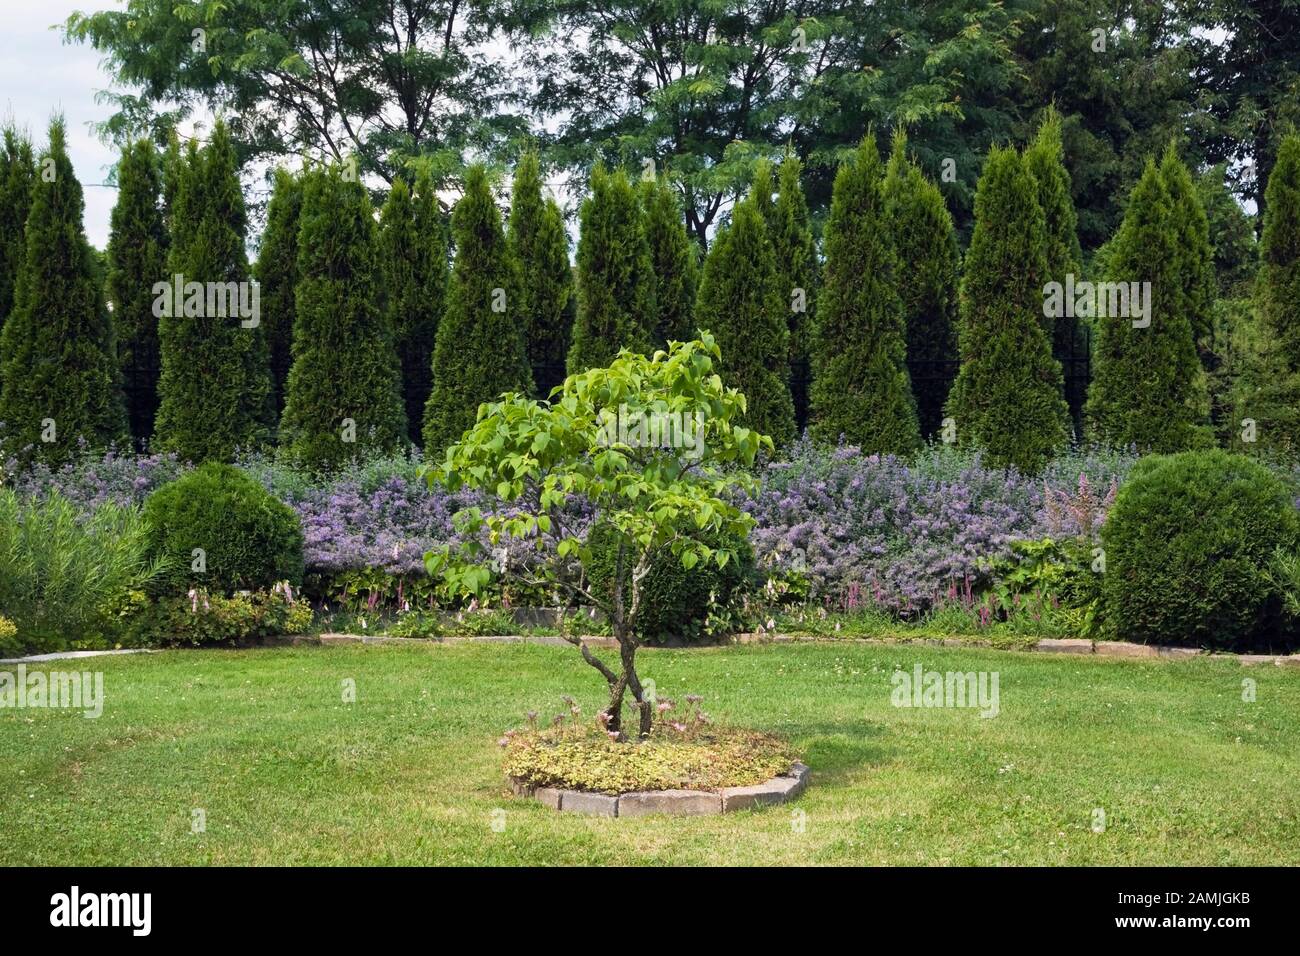 Raised paving stone edged border with deciduous tree in middle of green grass lawn plus purple Nepeta - Catmint flowers, rows of Thuja - Cedar trees. Stock Photo